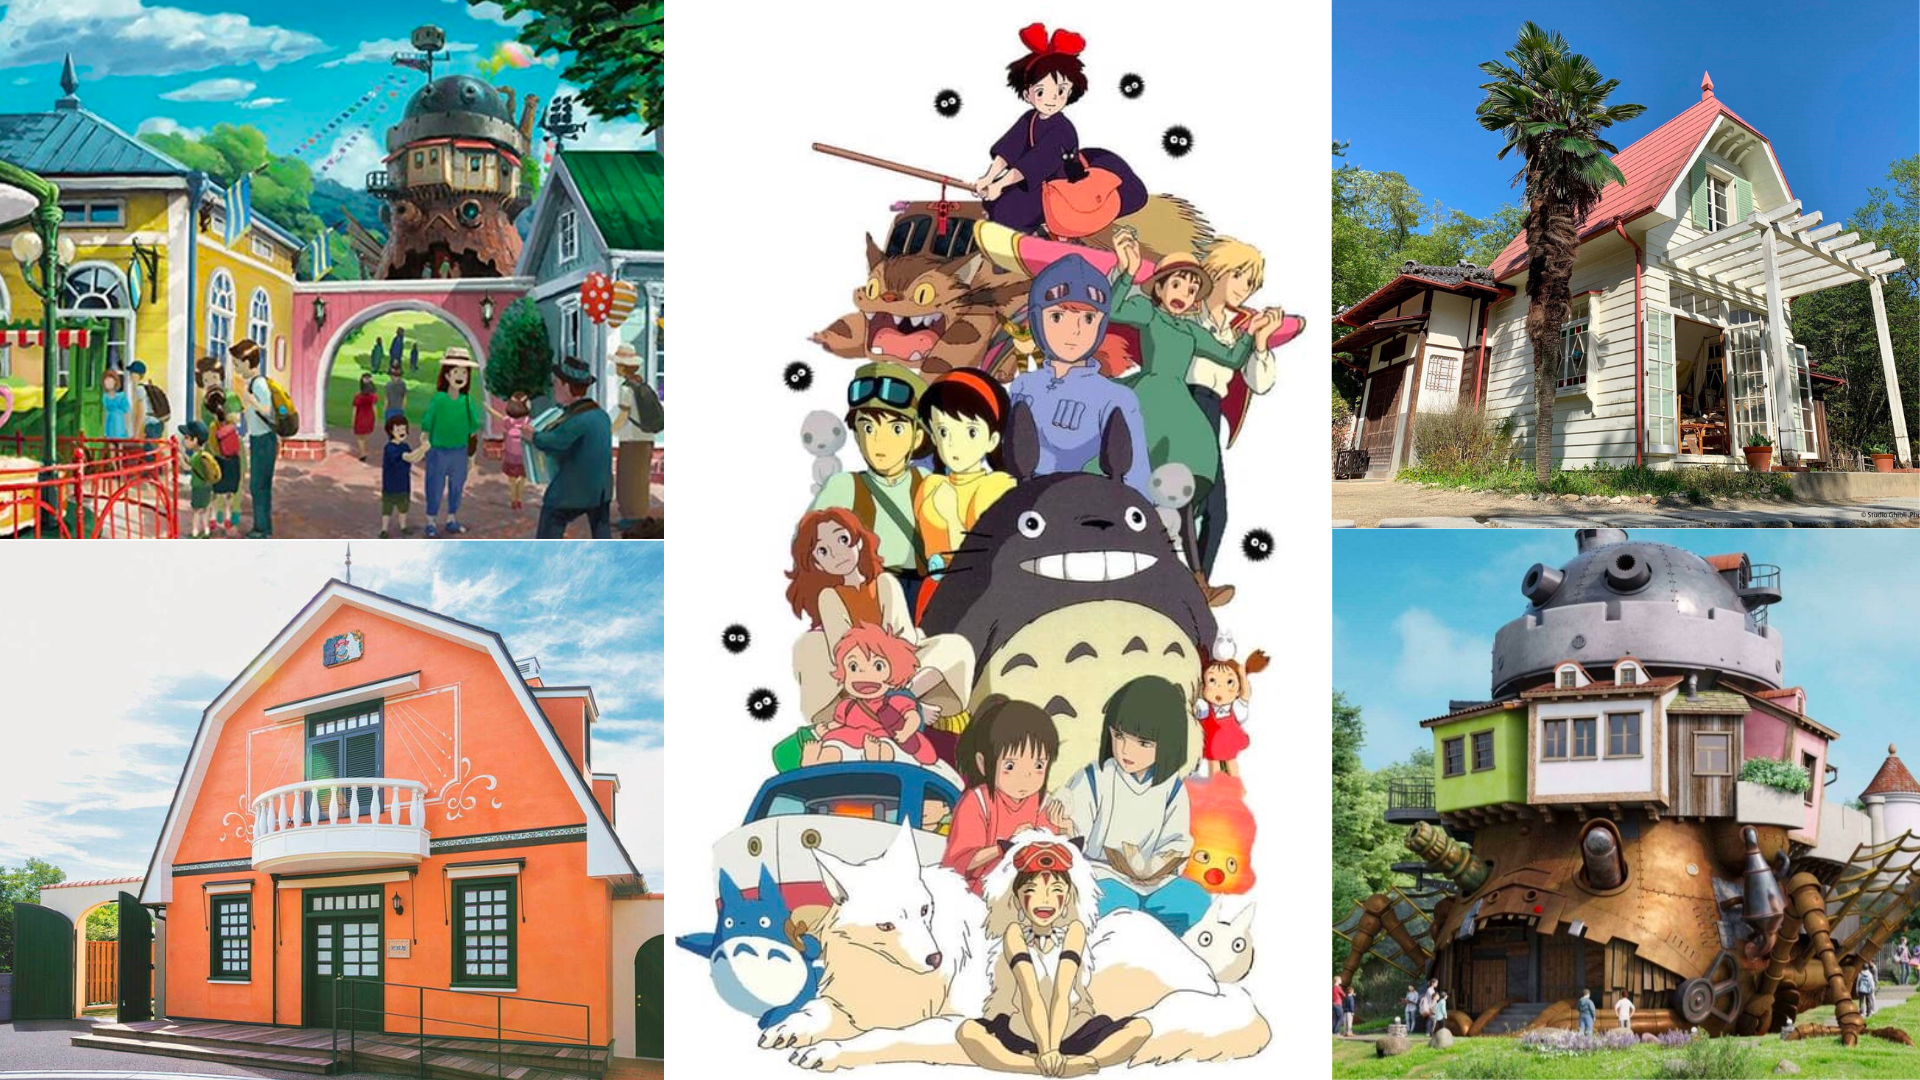 Want to meet Totoro? Or perhaps visit Howl’s Moving Castle? Well it is finally your chance to experience the real life Studio Ghibli in Japan.